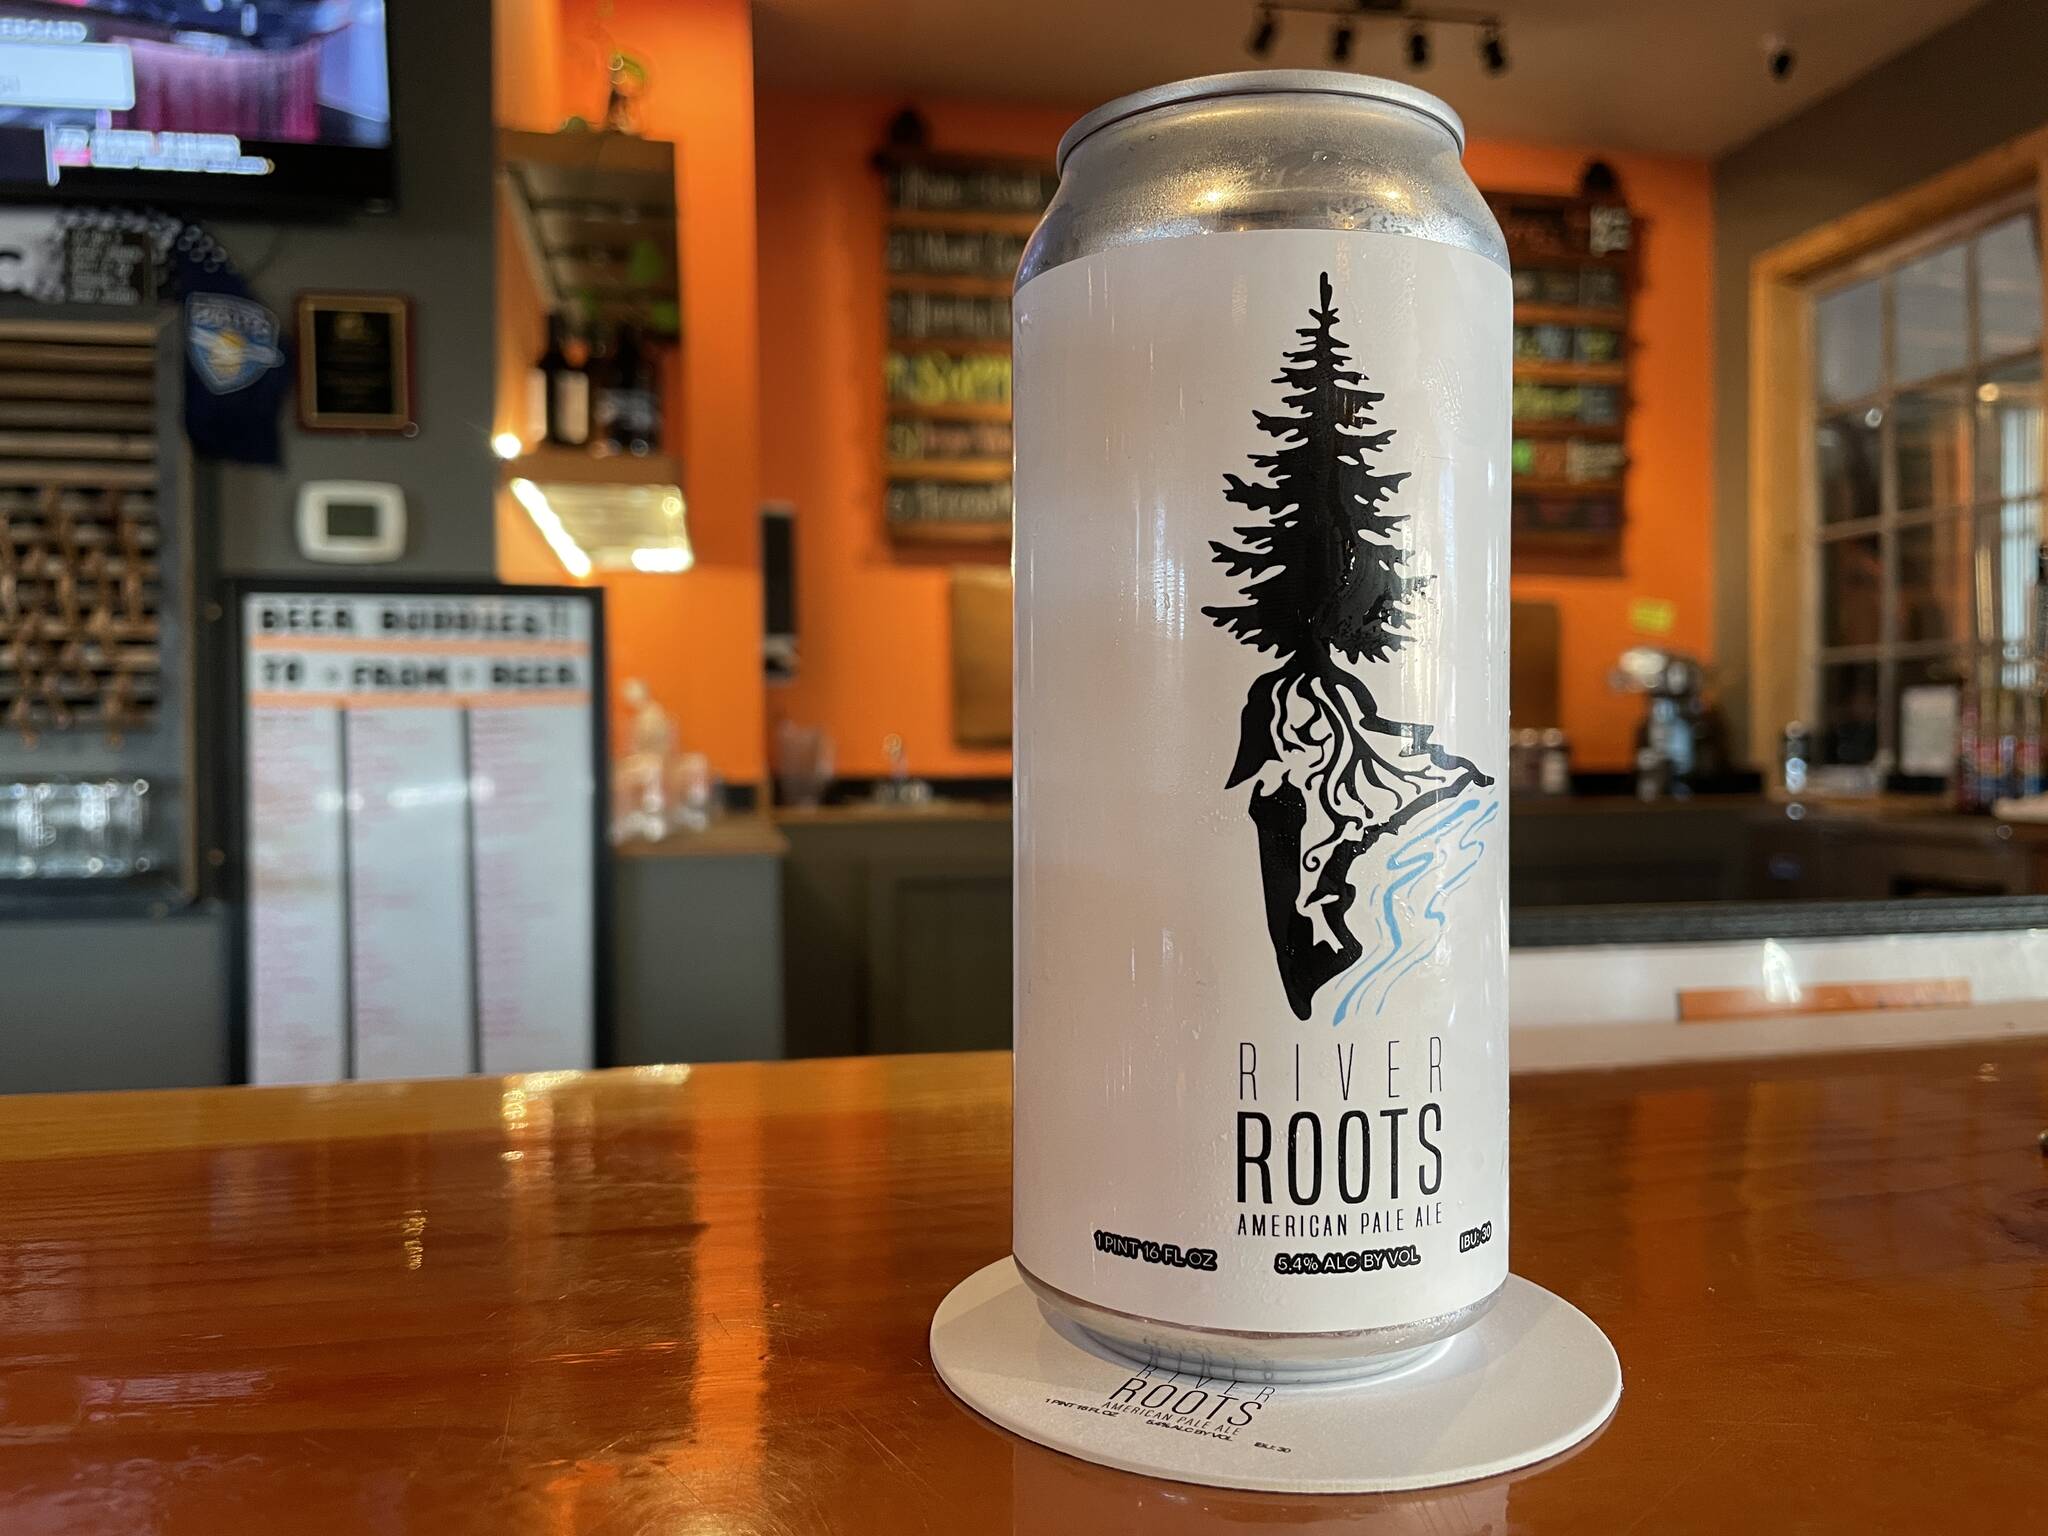 Michael S. Lockett / The Daily World
The Grays Harbor Conservation District and Mount Olympus Brewery partnered to producce River Roots, a new beer with a riverbank focus.